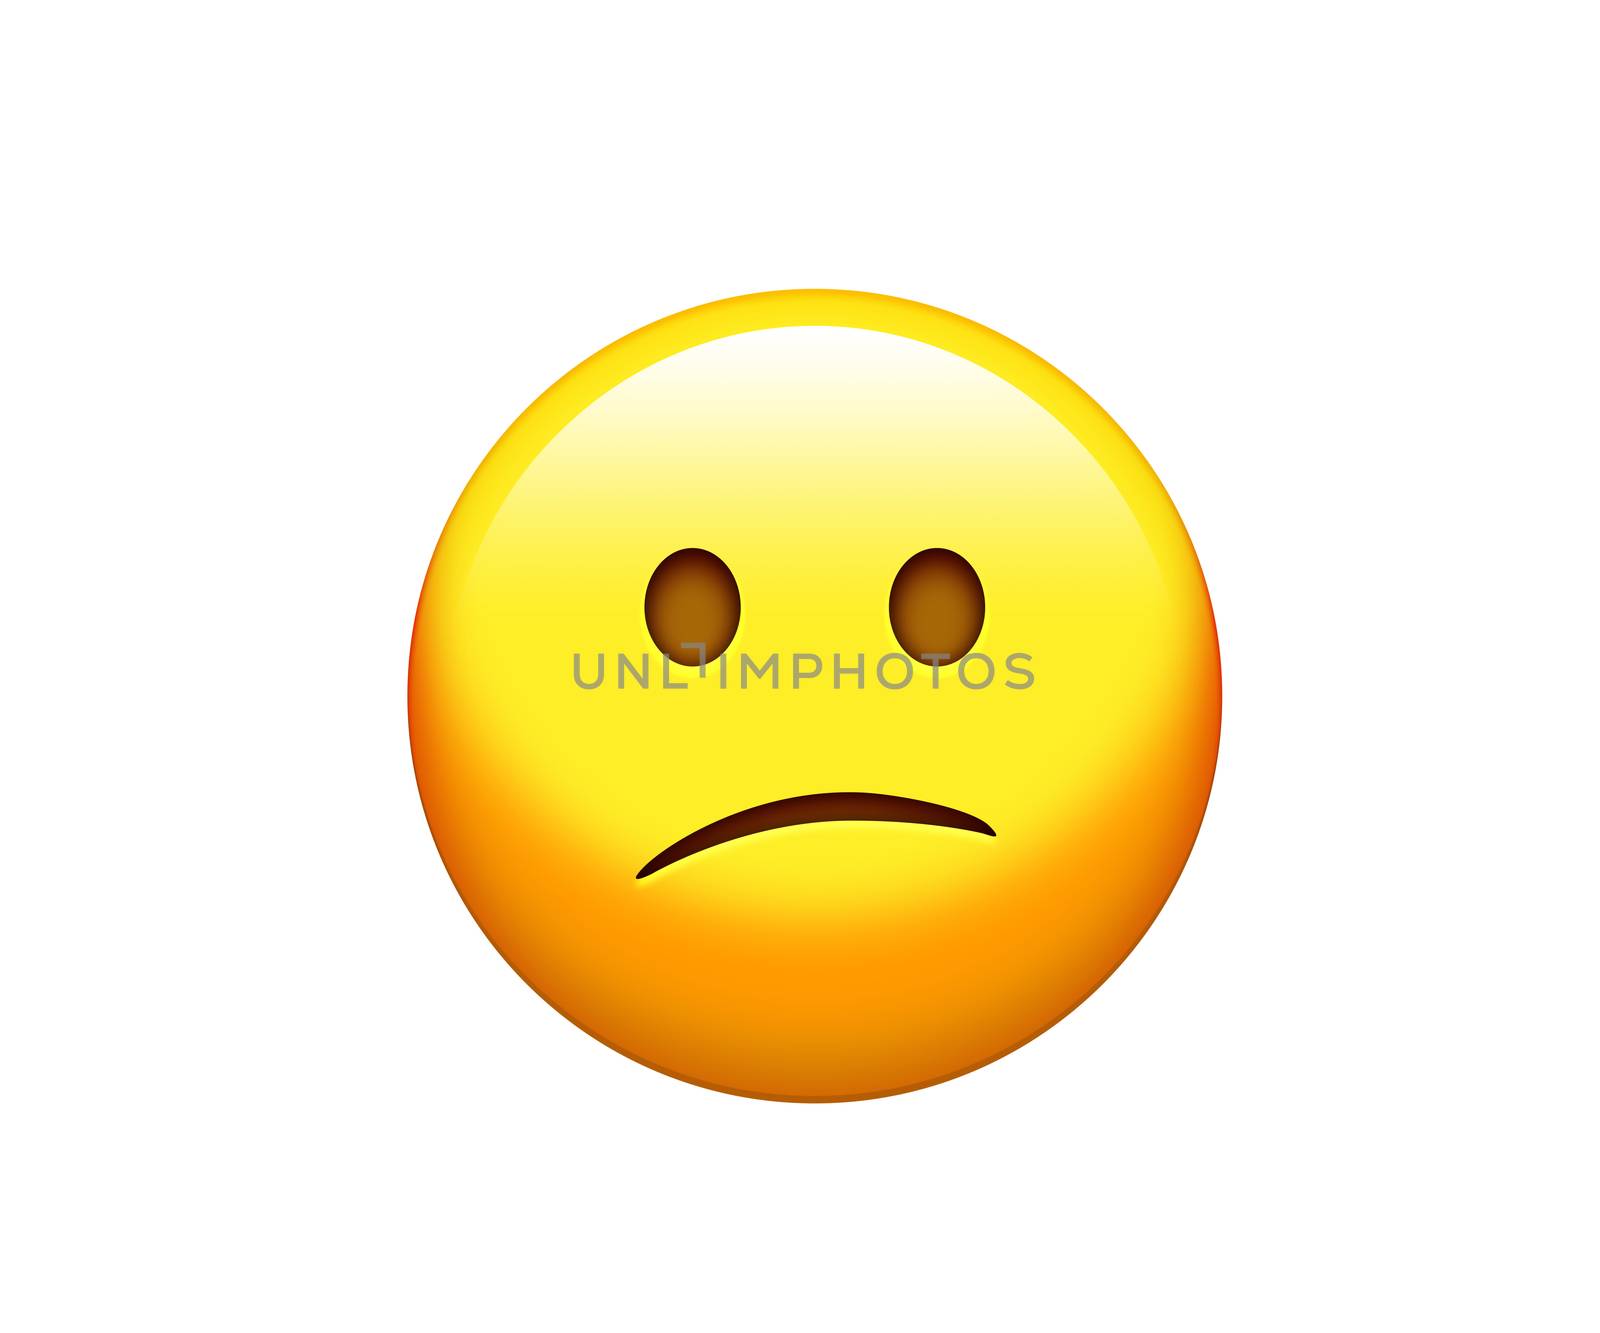 Isolated yellow unhappy and upset face icon by cougarsan